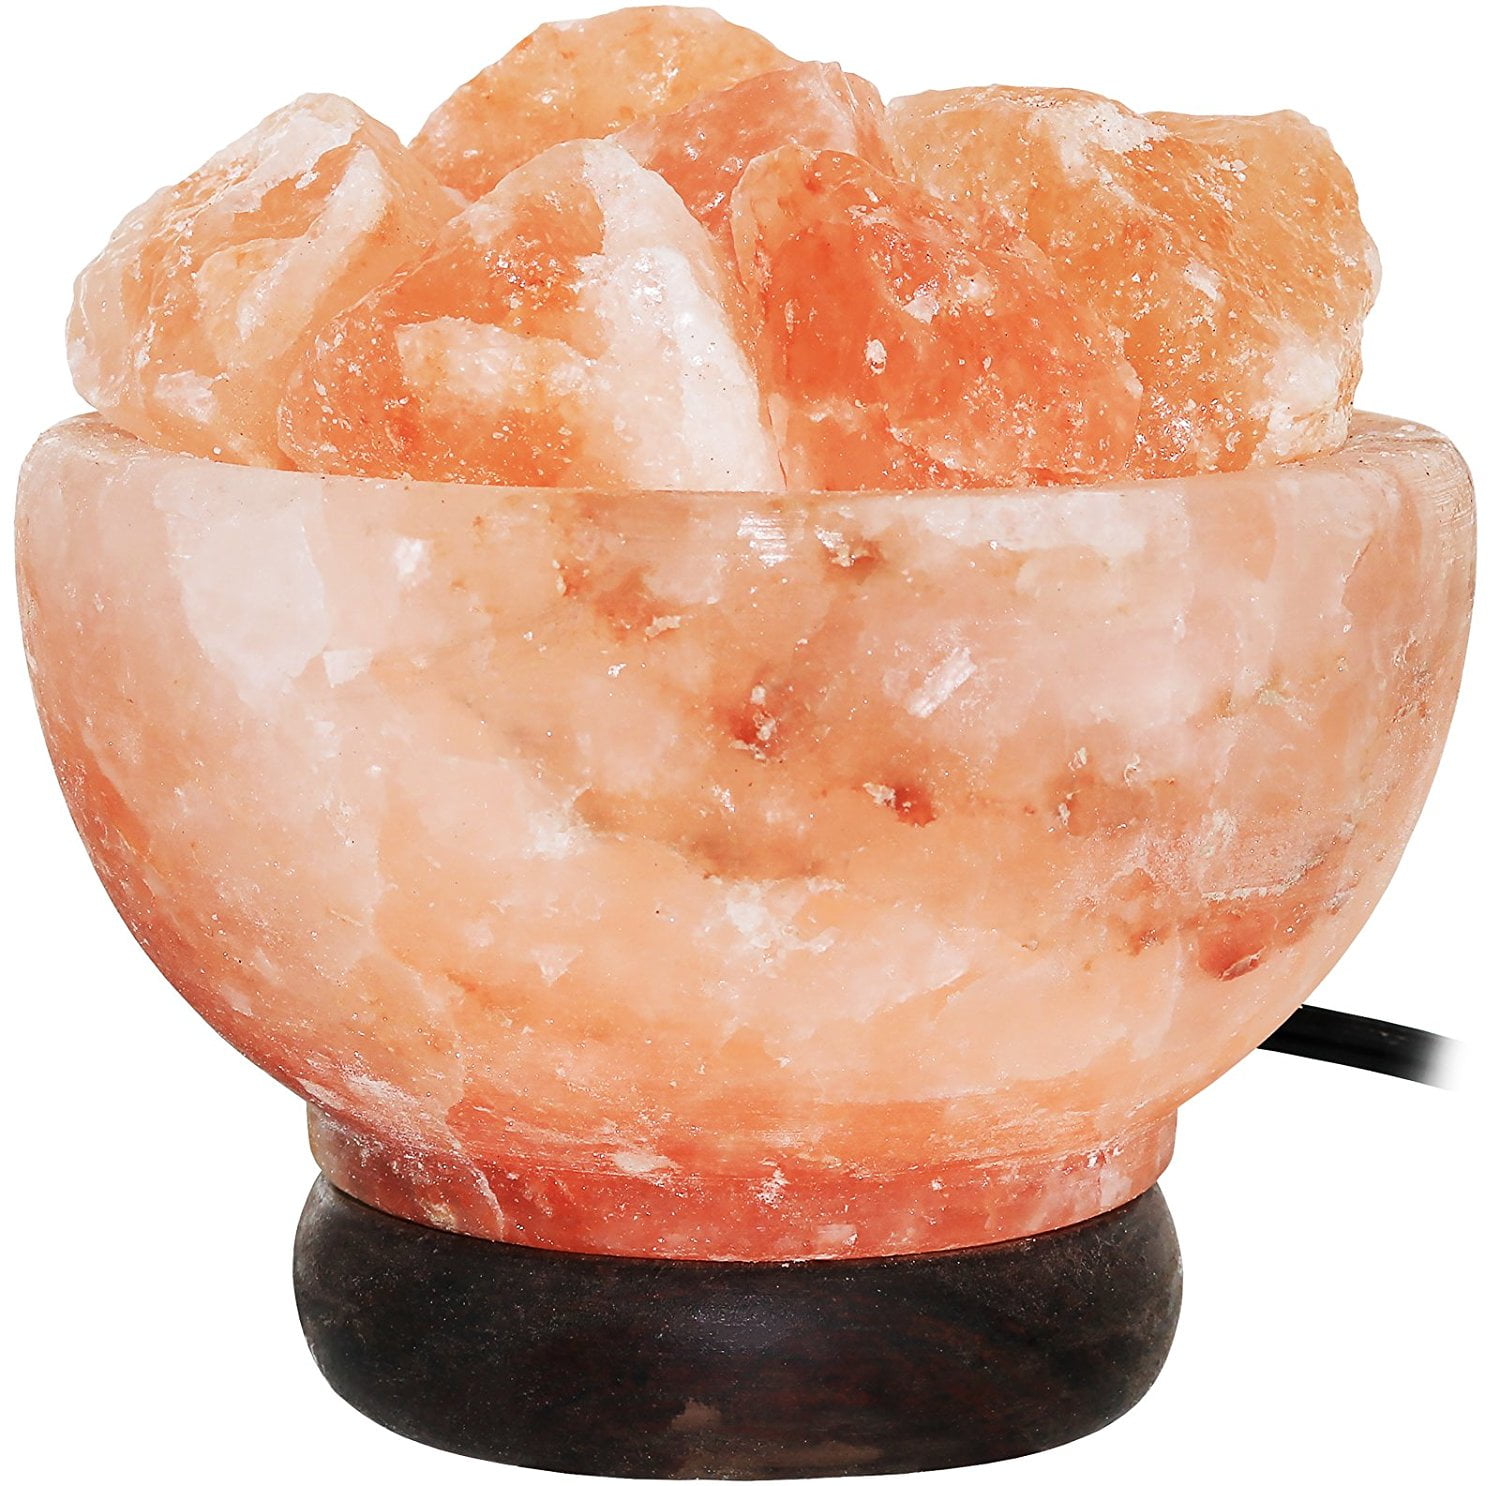 NEW Himalayan Salt Lamp w/ Natural Bamboo Wood Frame w/ Bulb and Dimmer Control 